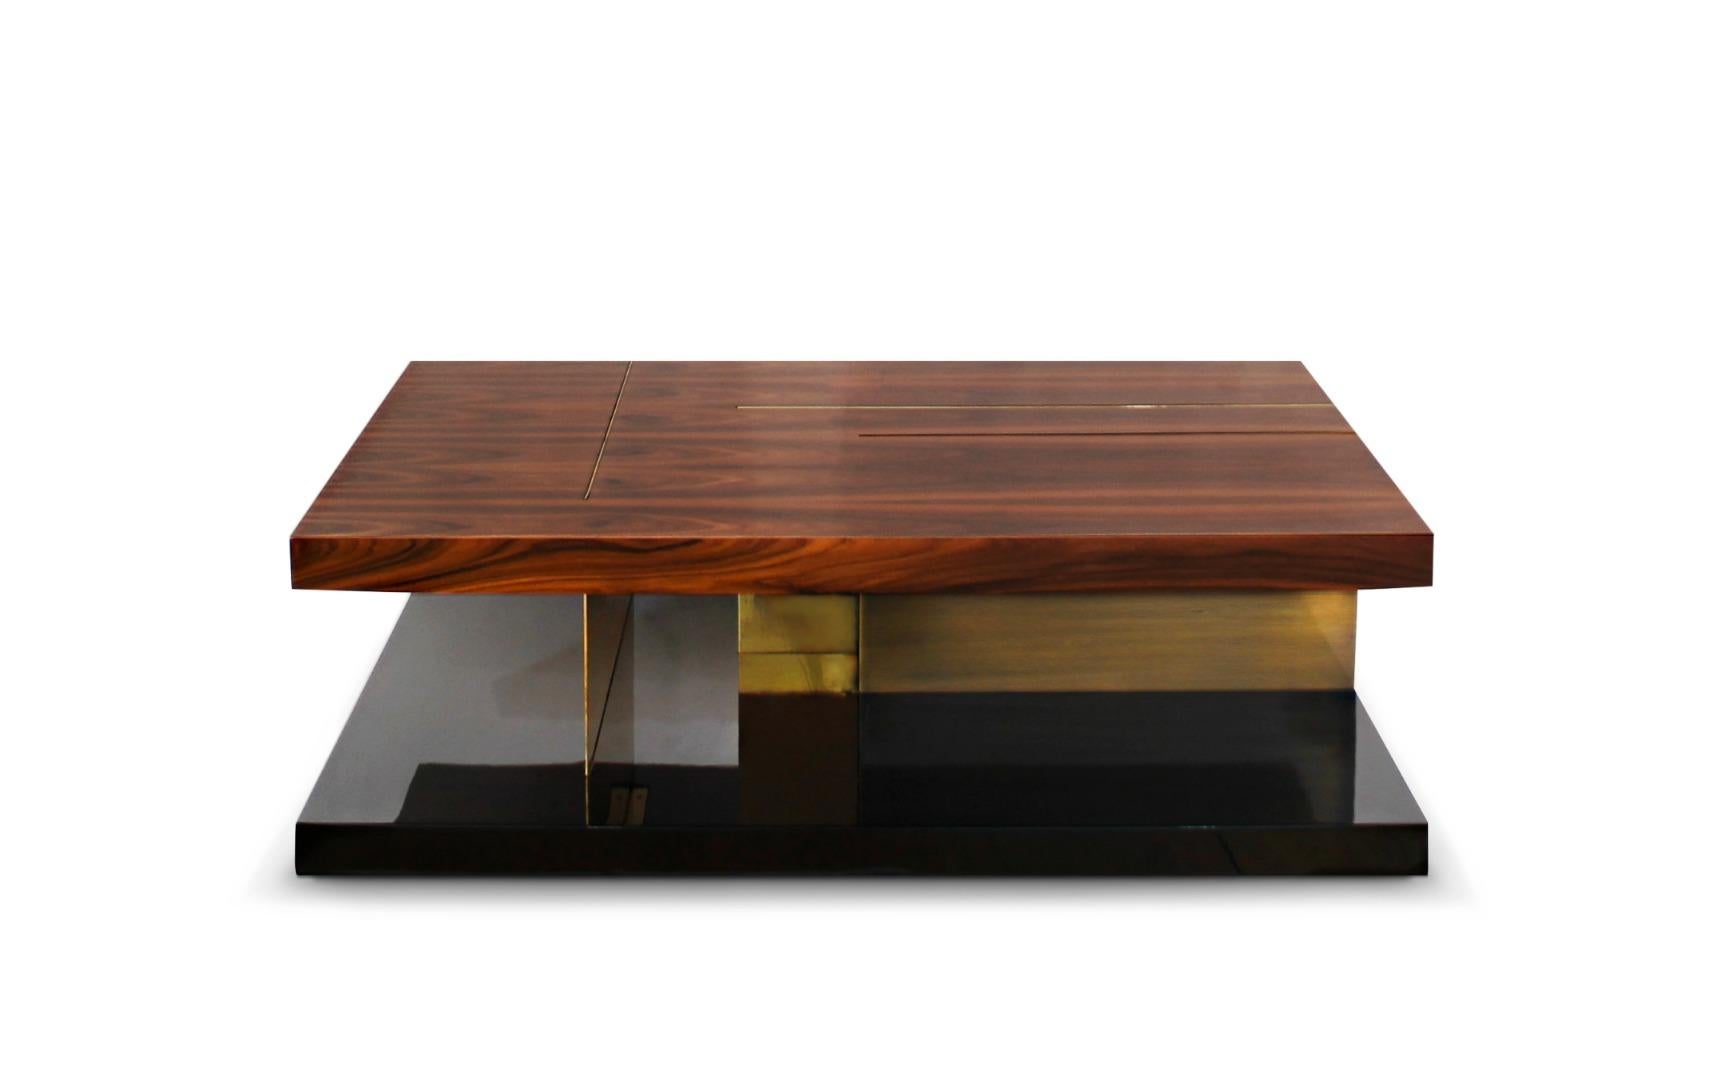 The Lowlands of Scotland is called Lallans, also designating the integration, blending, and the combination of some scots dialects. Lallan centre table combines four different materials as wood and brass. All these components cross and integrate